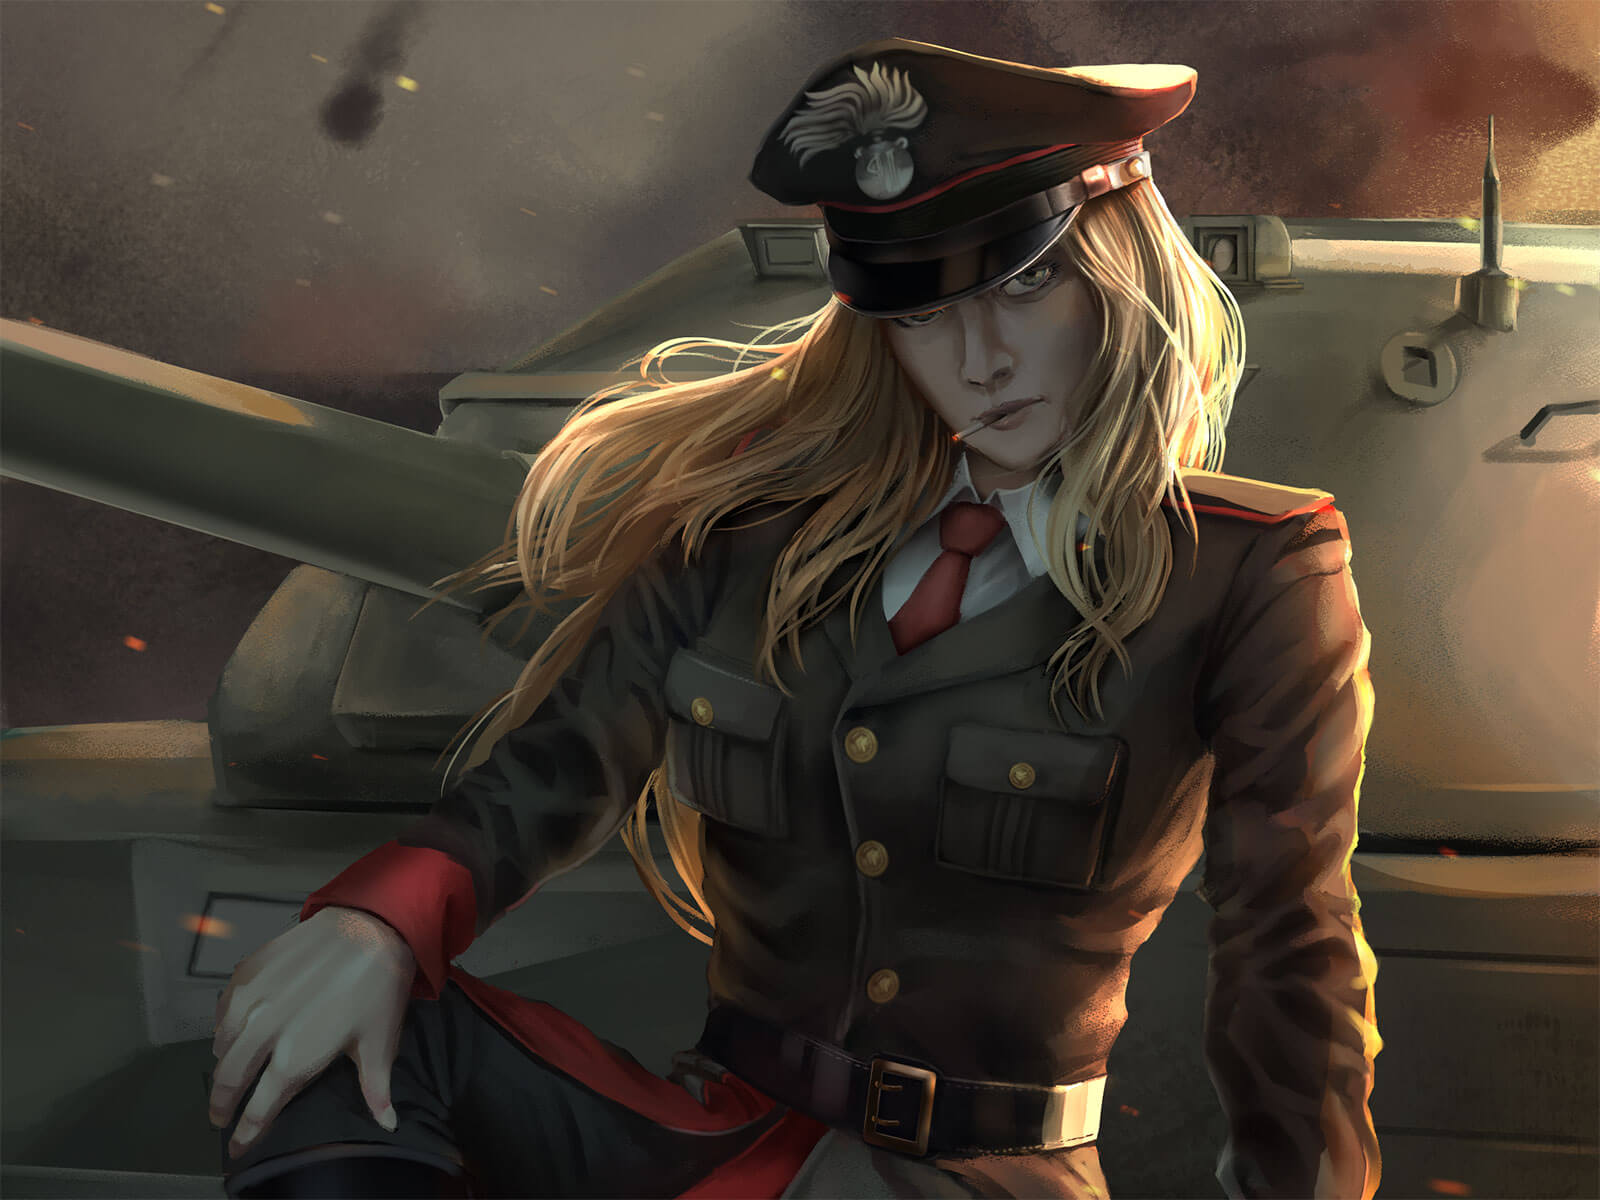 A serious woman wears a black and red military uniform while sitting on a tank